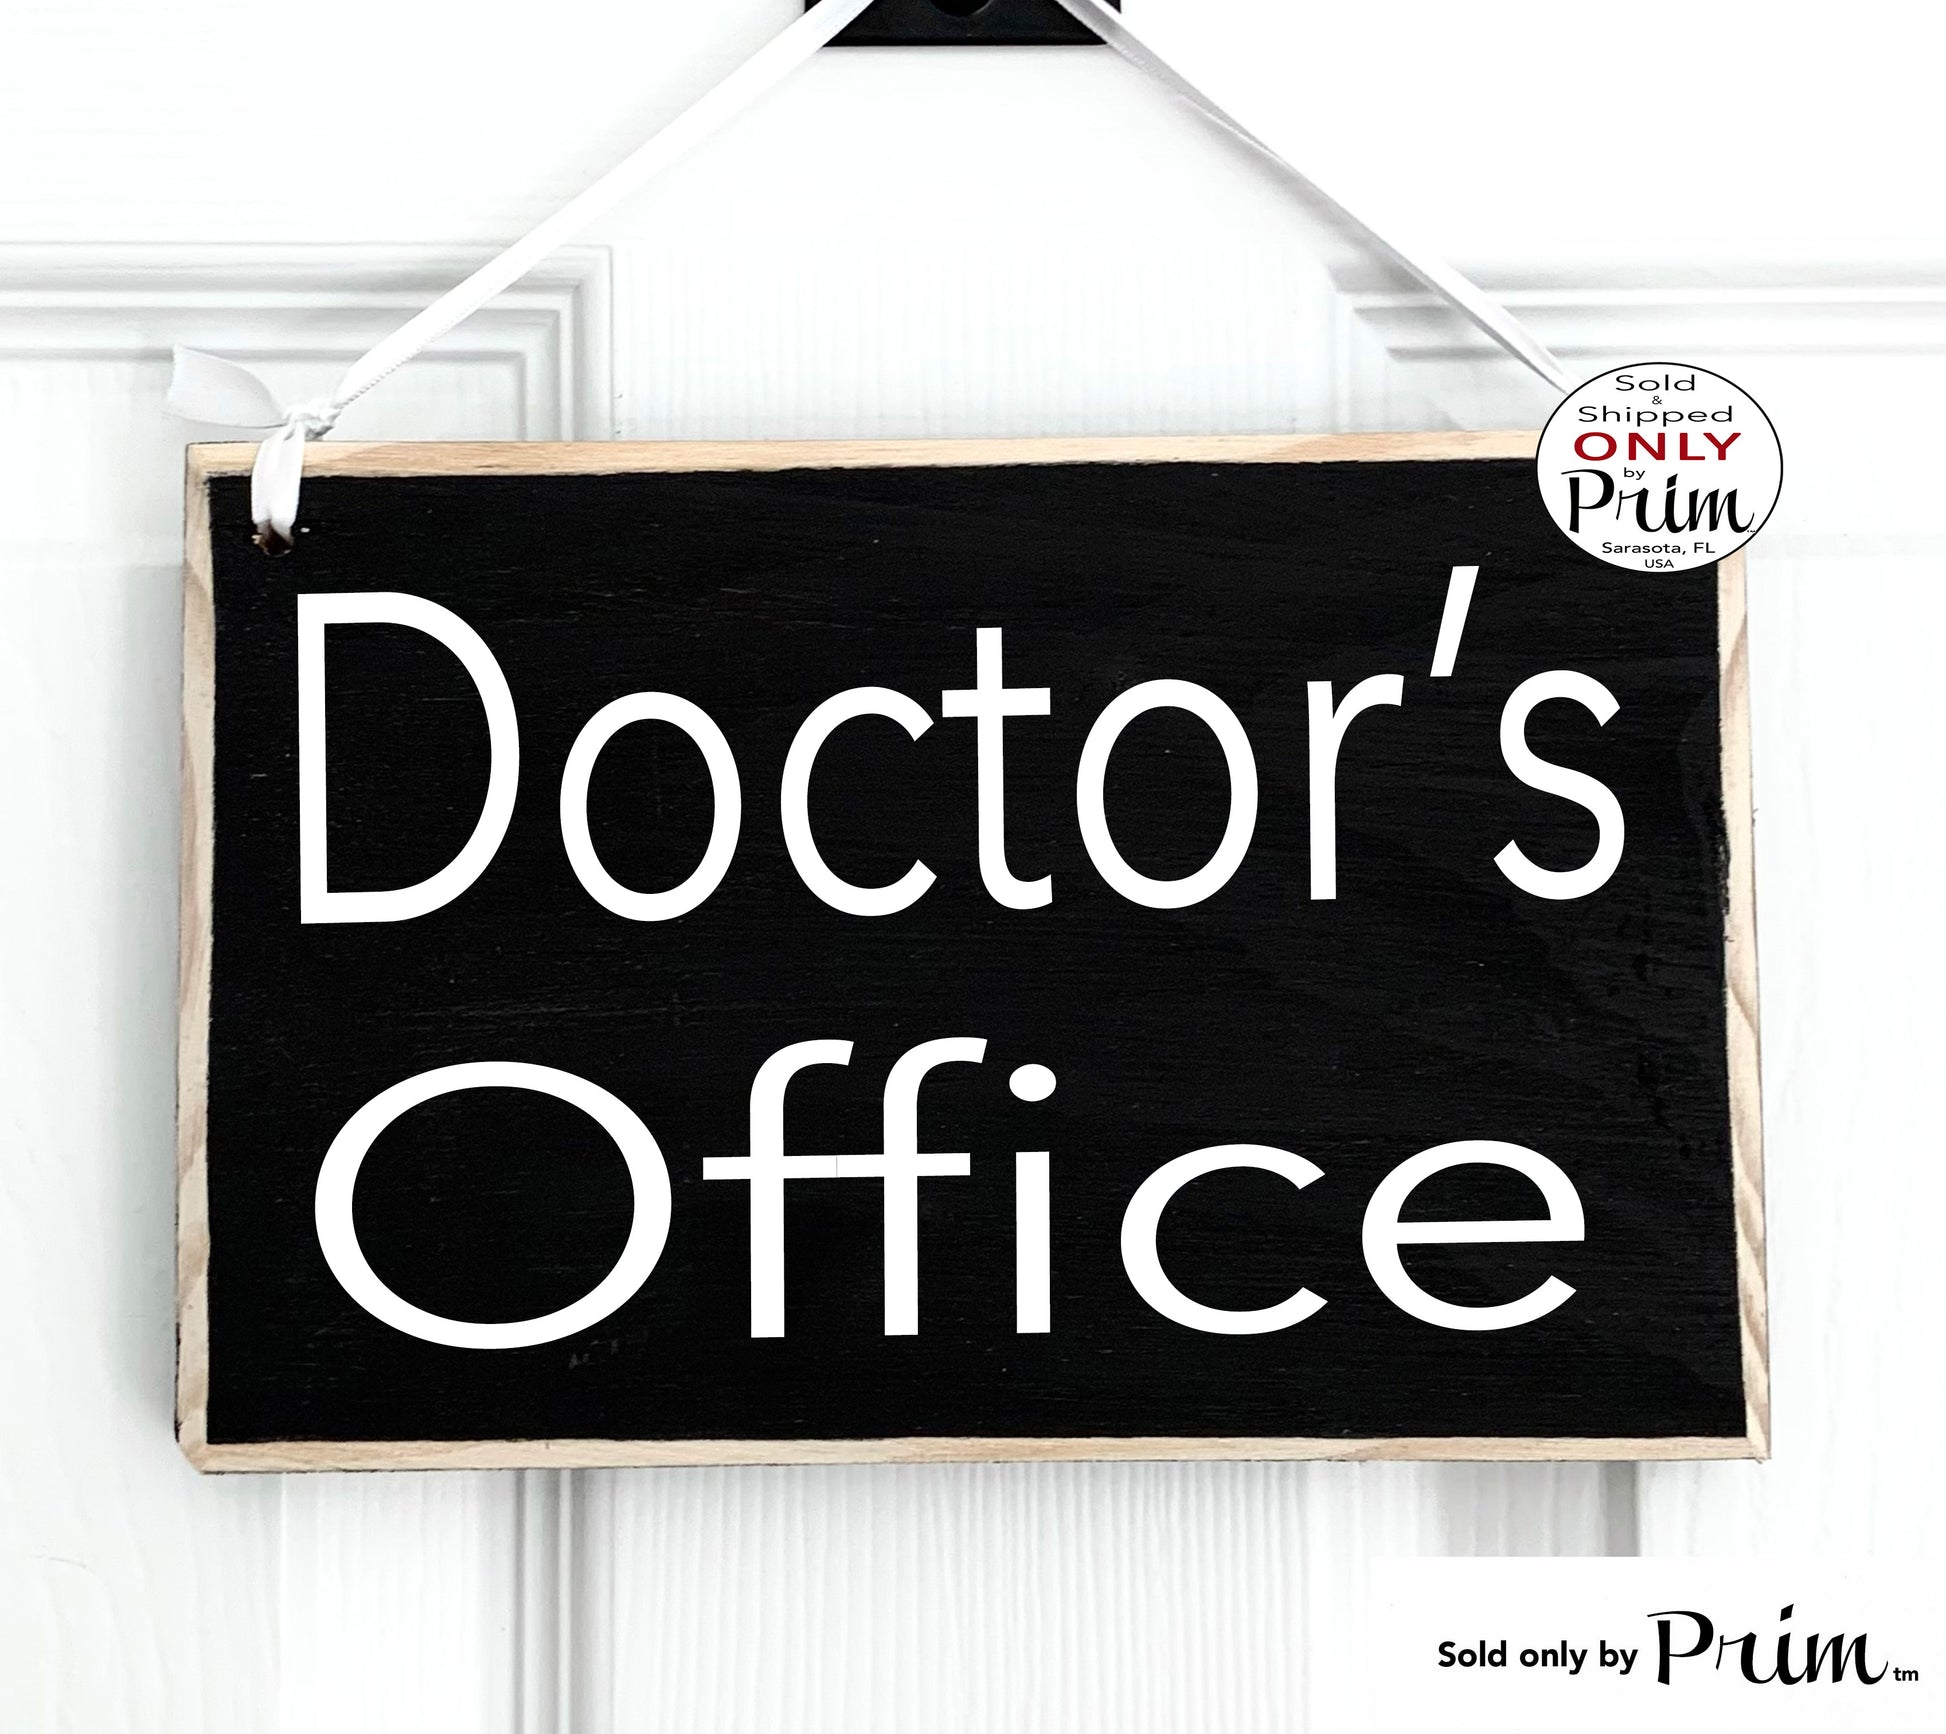 Designs by Prim 8x6 Doctor's Office Custom Wood Sign | Physician Office Medical Facility Business Welcome Come On In Walk-Ins Open Entry Door Hanger Plaque